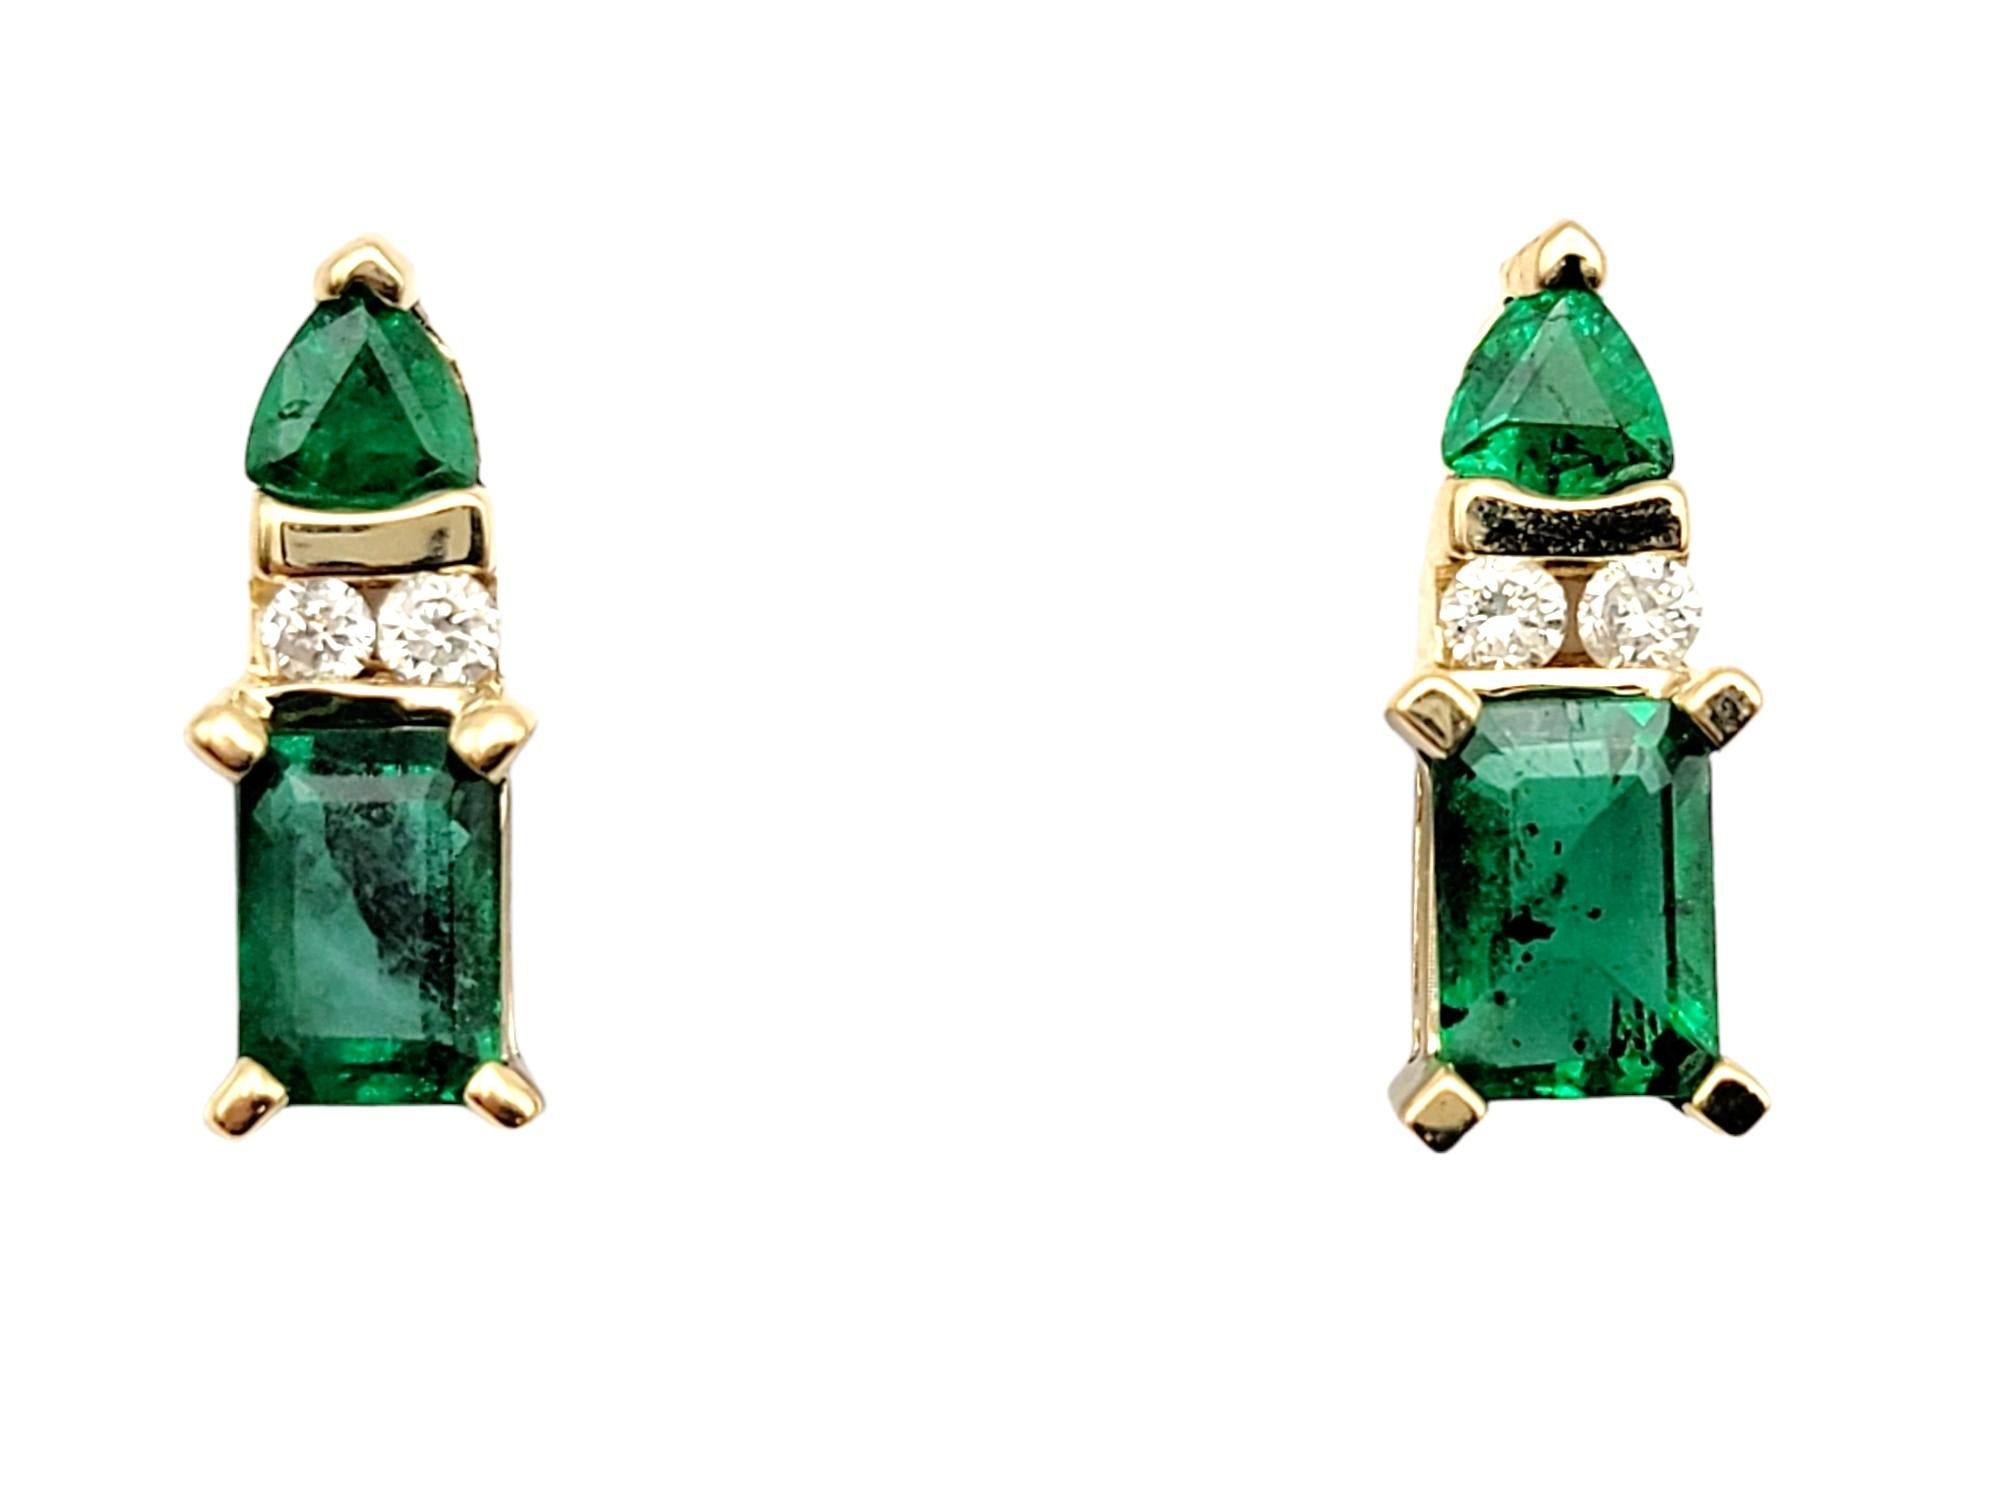 Contemporary 1.85 Carats Total Emerald Cut Emerald and Diamond Stud Earrings in Yellow Gold